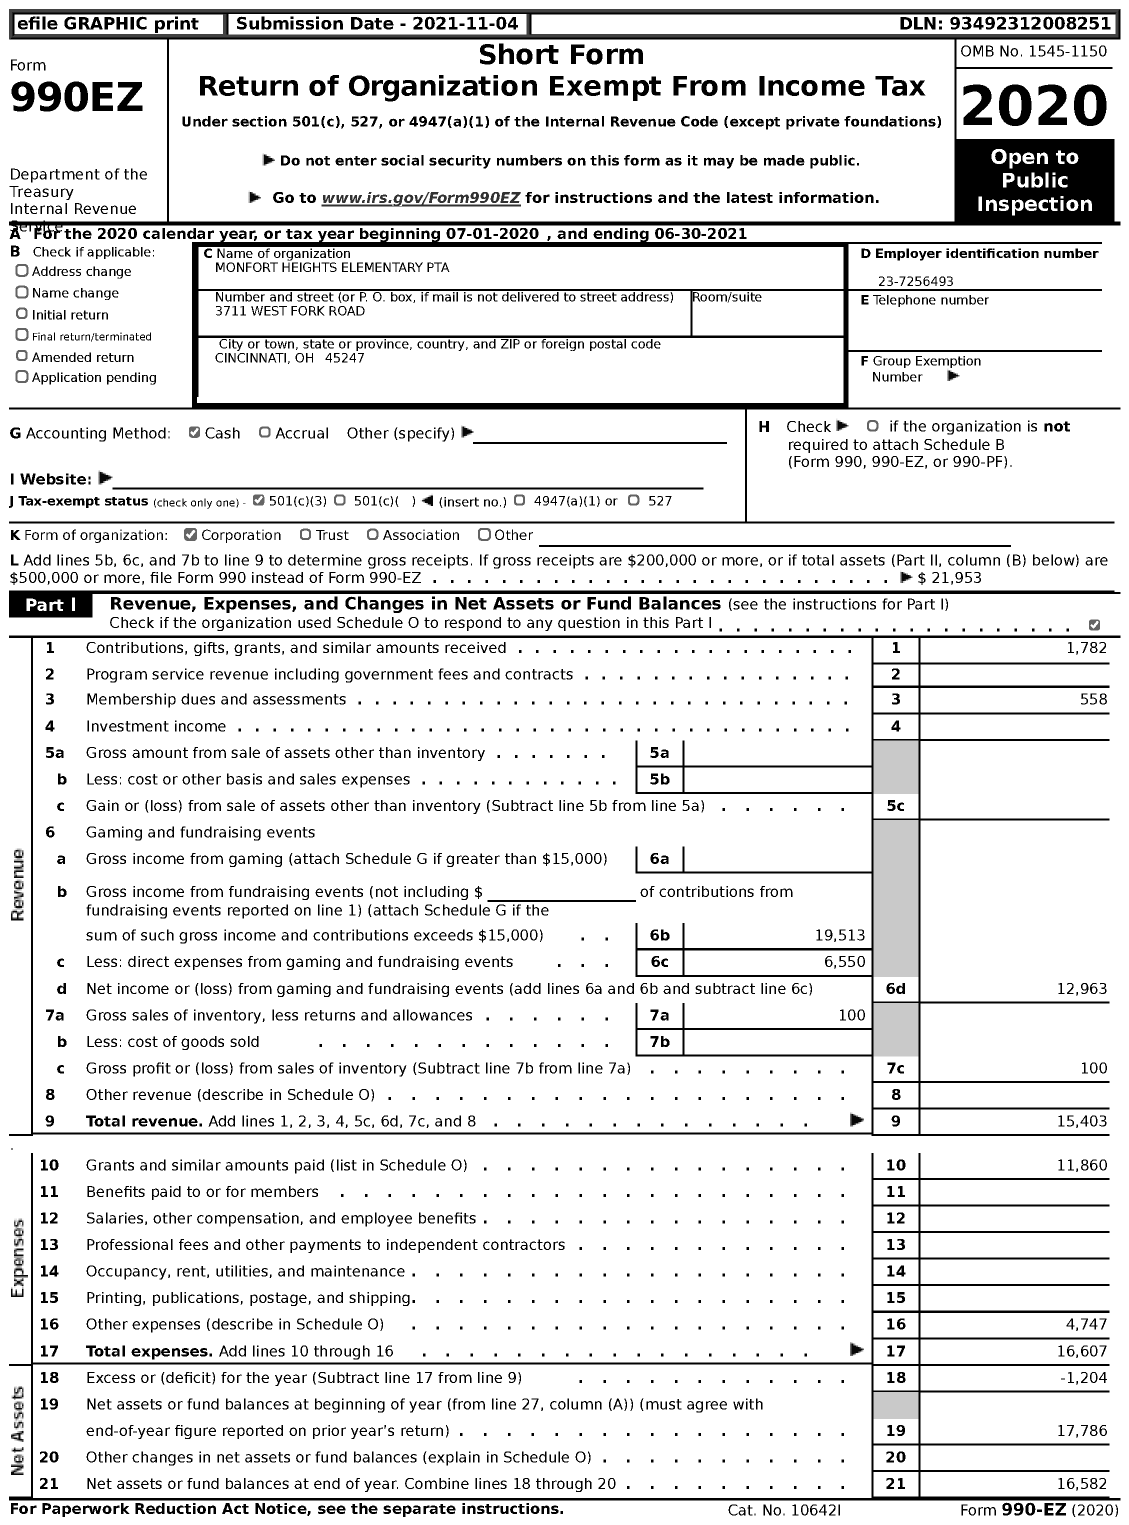 Image of first page of 2020 Form 990EZ for Monfort Heights Elementary PTA